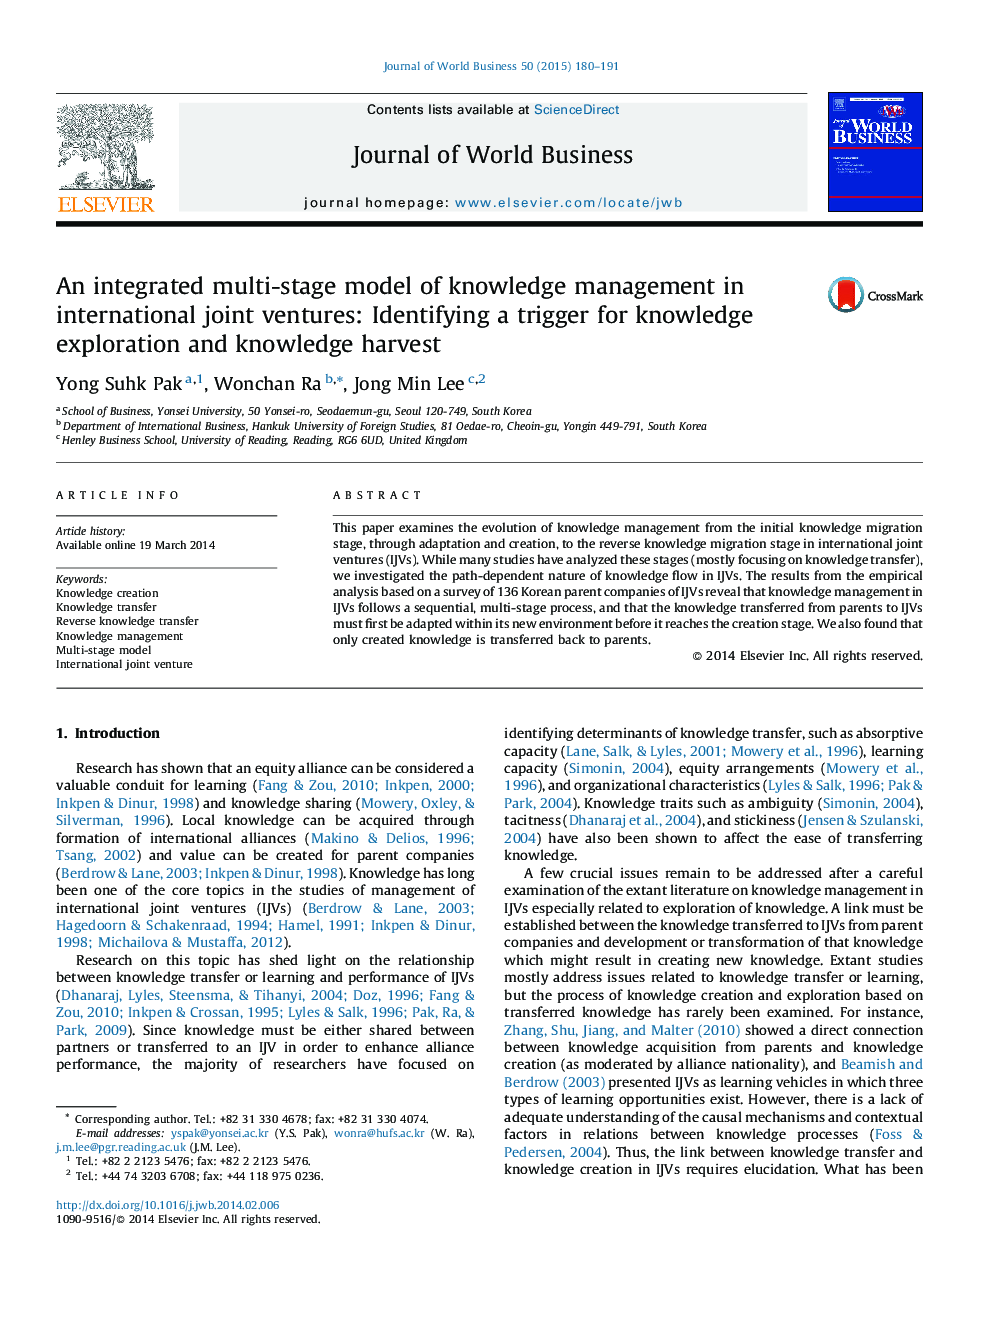 An integrated multi-stage model of knowledge management in international joint ventures: Identifying a trigger for knowledge exploration and knowledge harvest